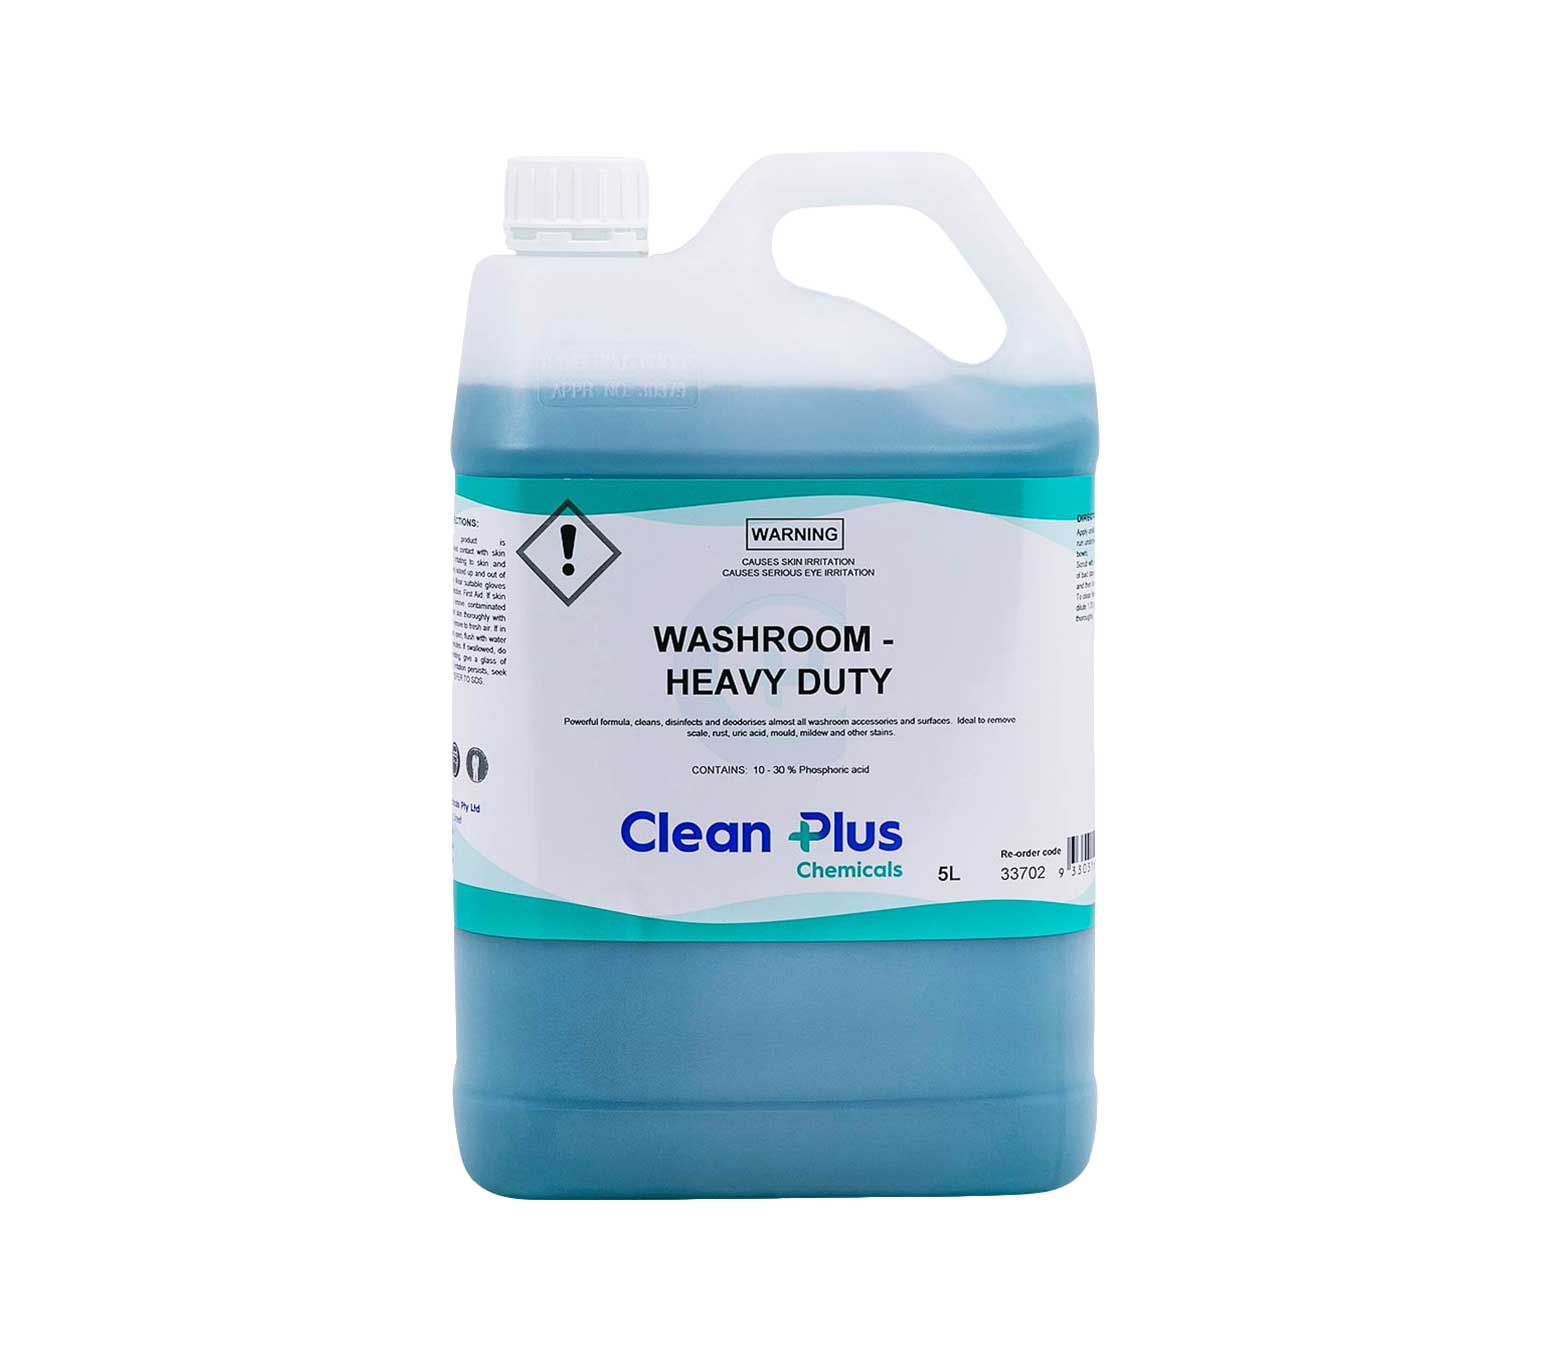 Washroom Heavy Duty - Powerful formula, cleans, disinfects and deodorises almost all washroom.